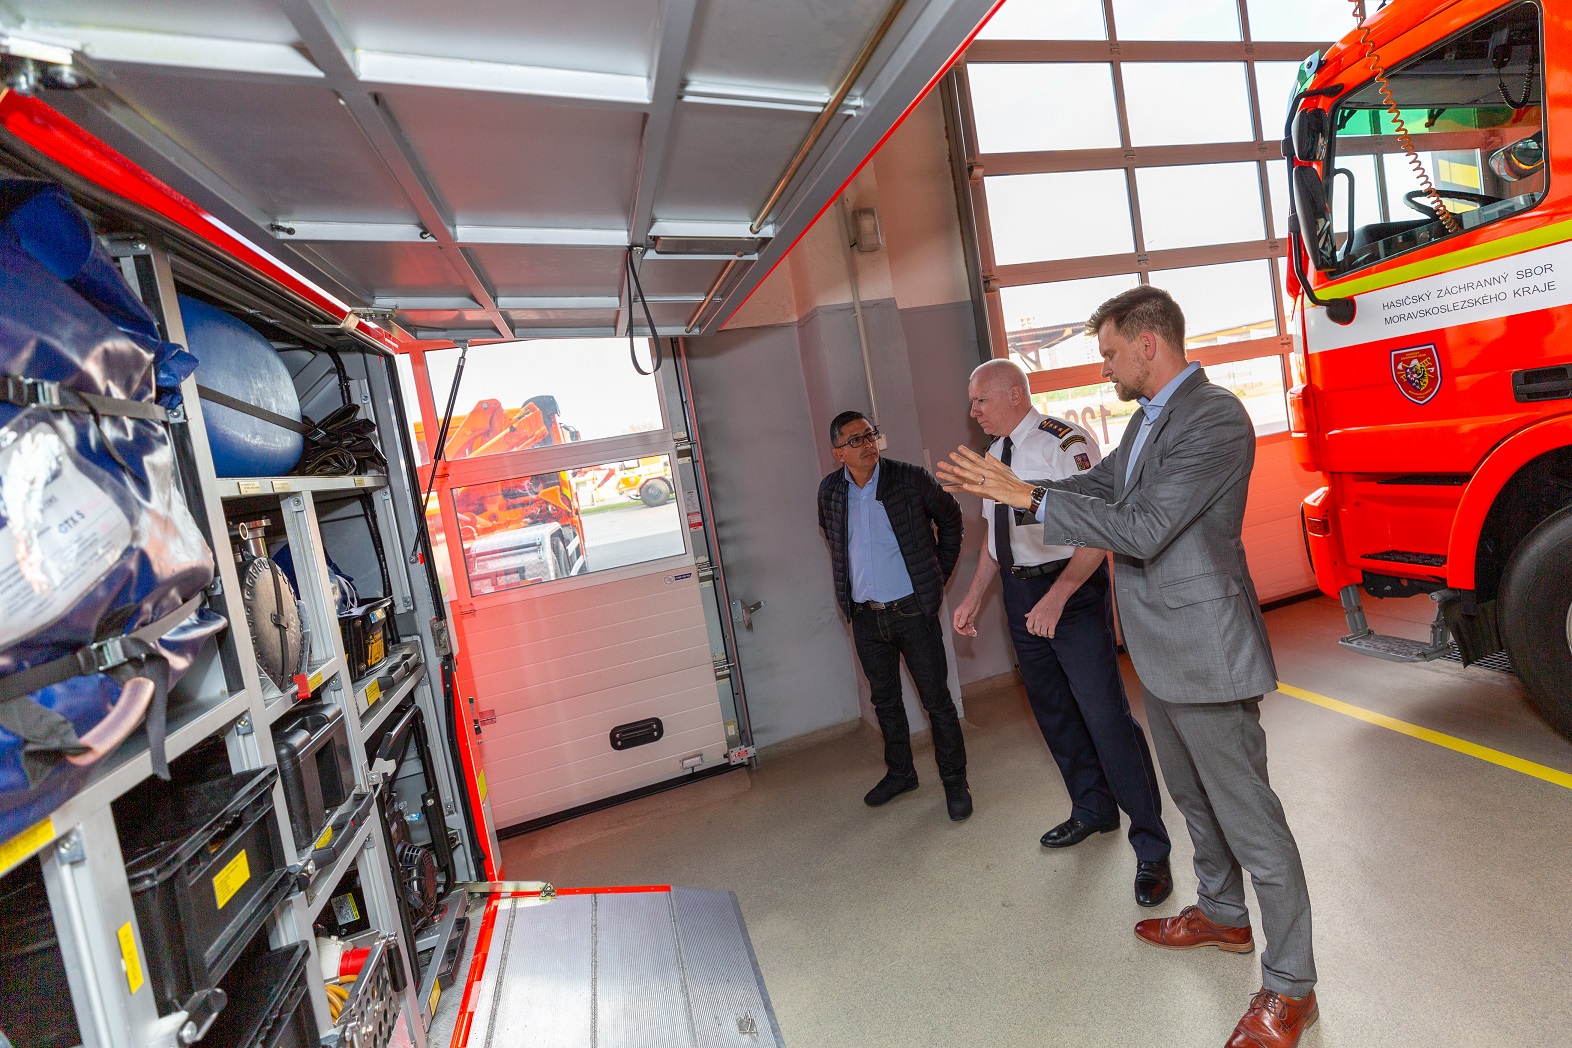 The director of FRS of Moravian-Silesian Region presents the firefighting equipment to the guests.jpg